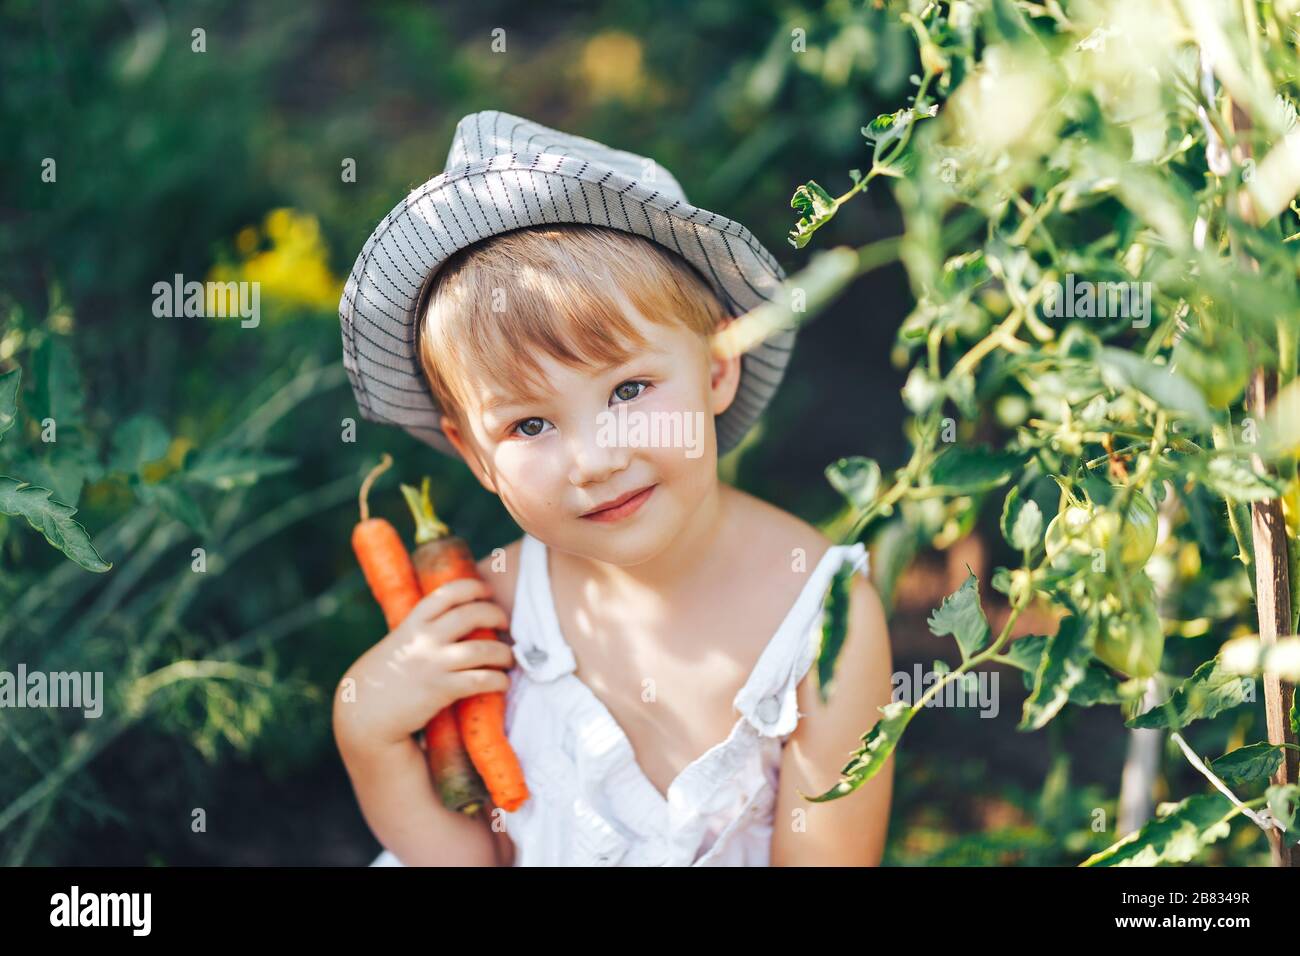 cute boy in hat and casual clothes sitting around tomatoes ang looking at camera, kid model posing in garden Stock Photo